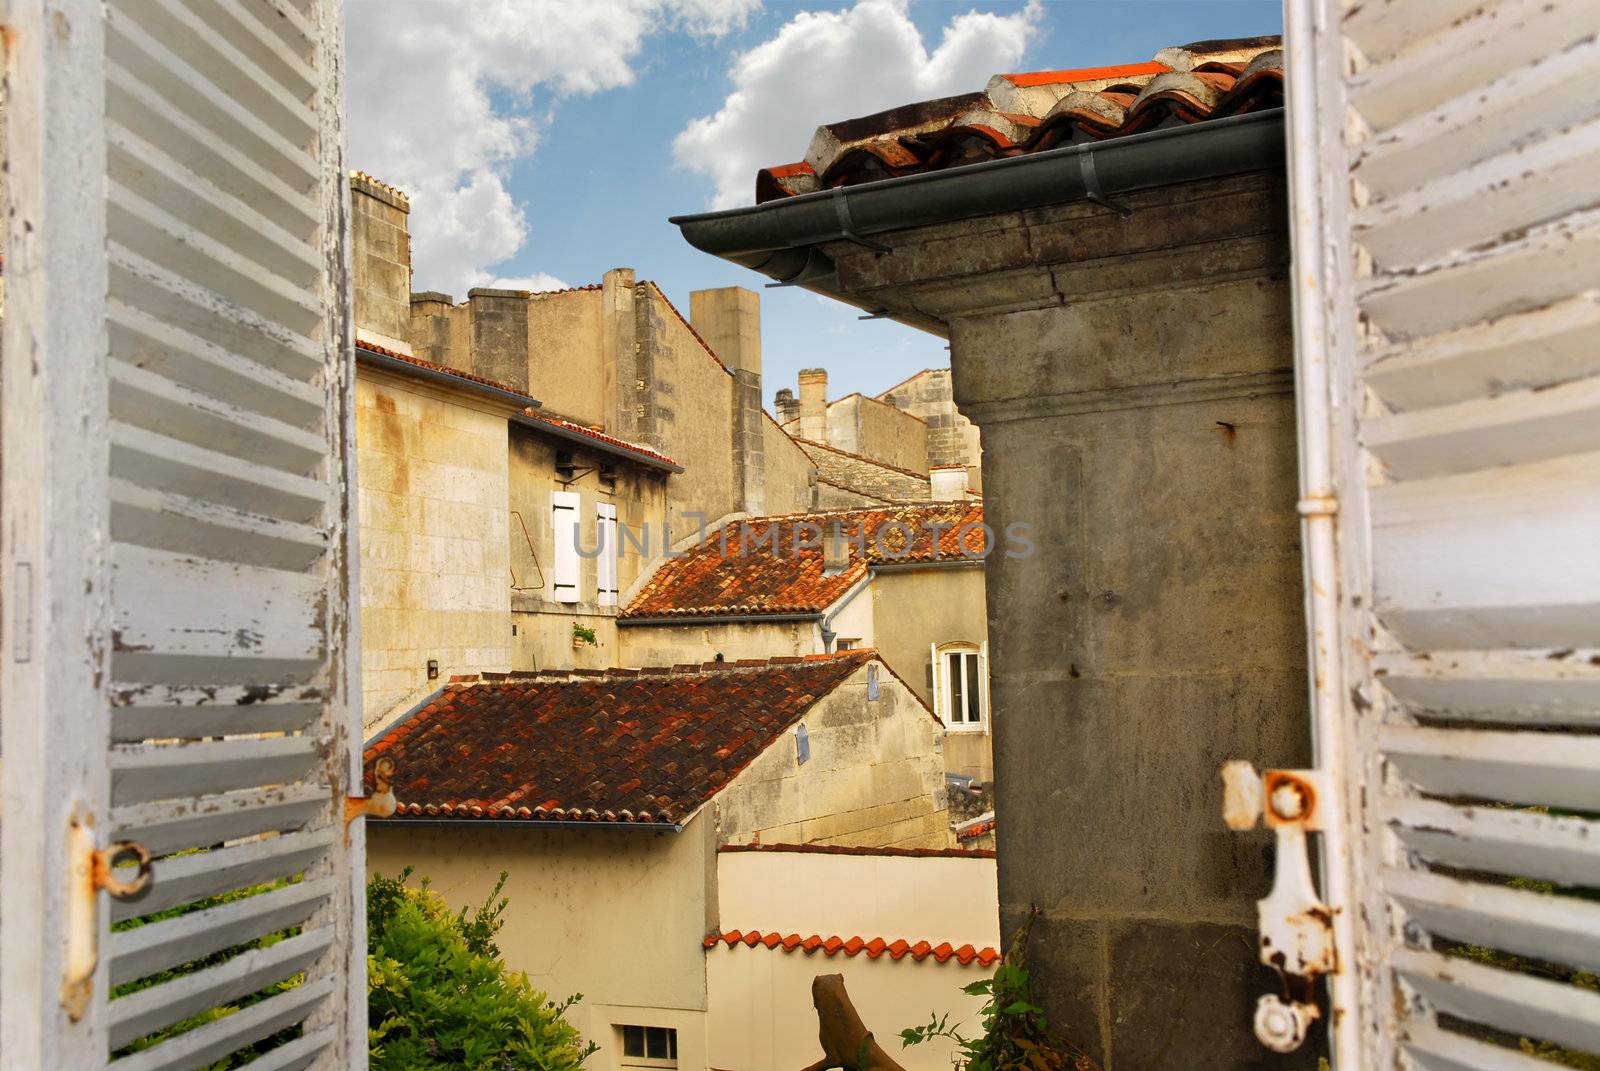 View in Cognac by elenathewise